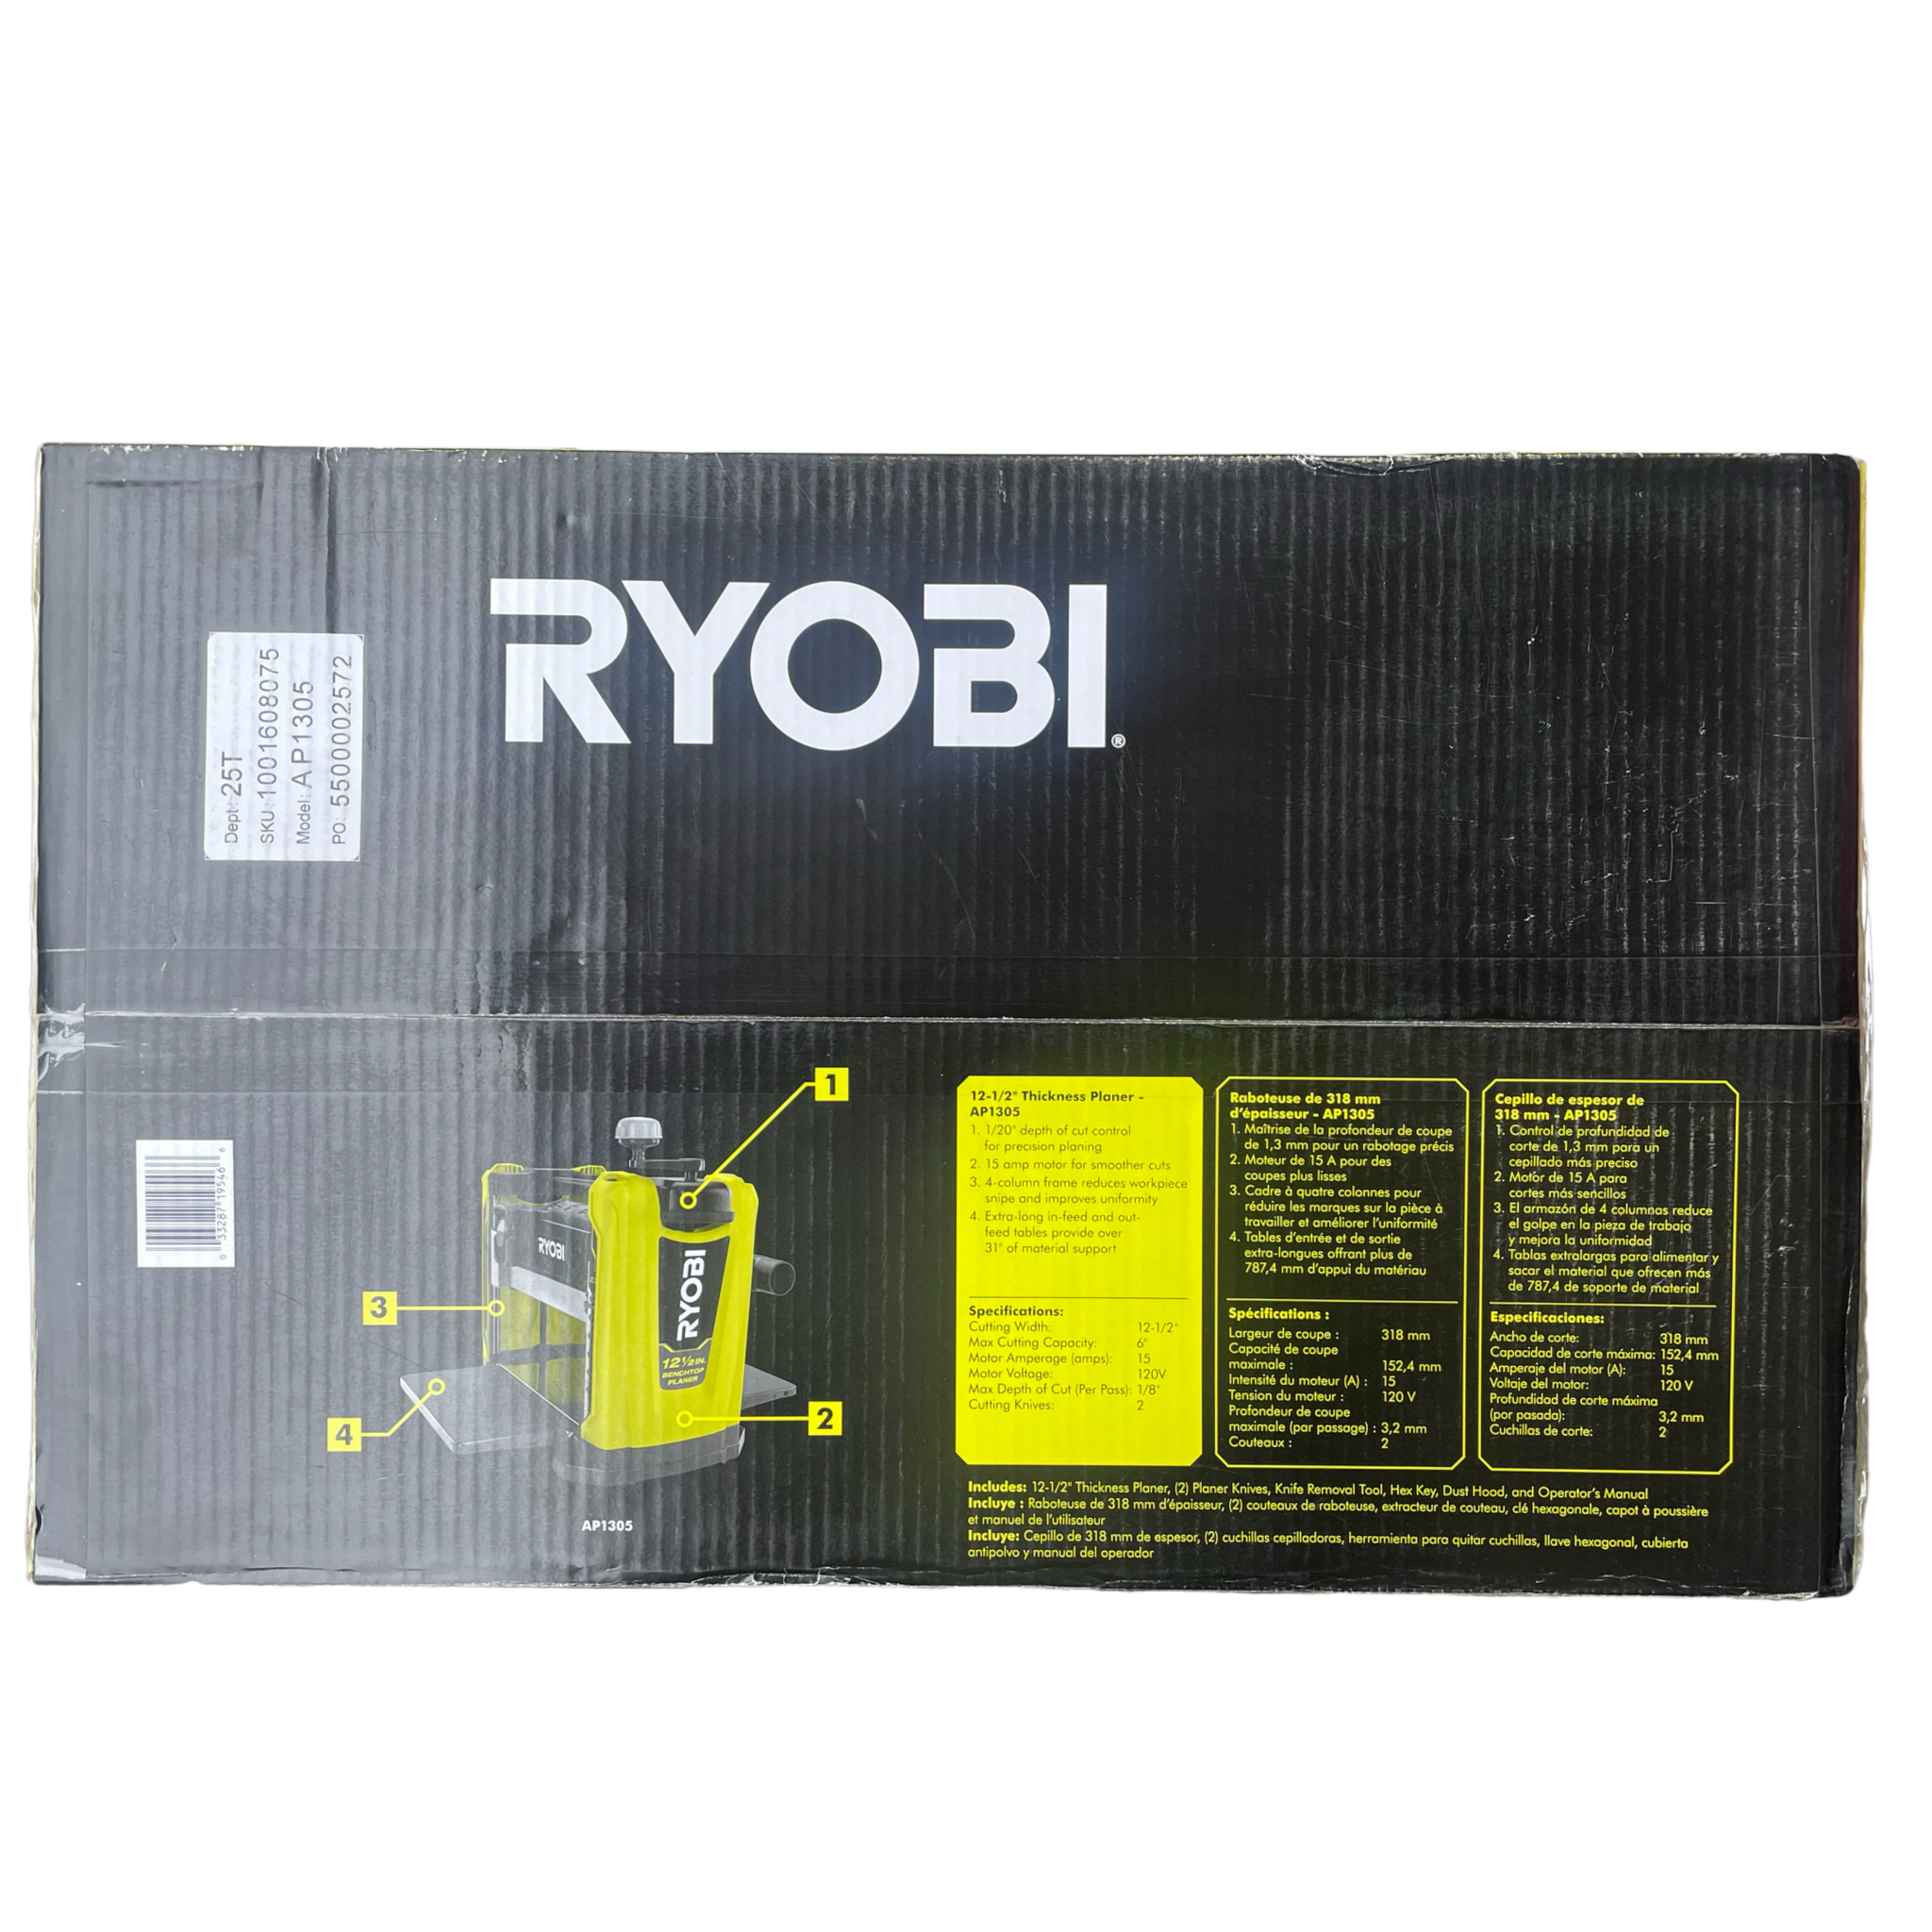 15 12-1/2 in. Corded Planer with Planer Knives, Re – Ryobi Deal